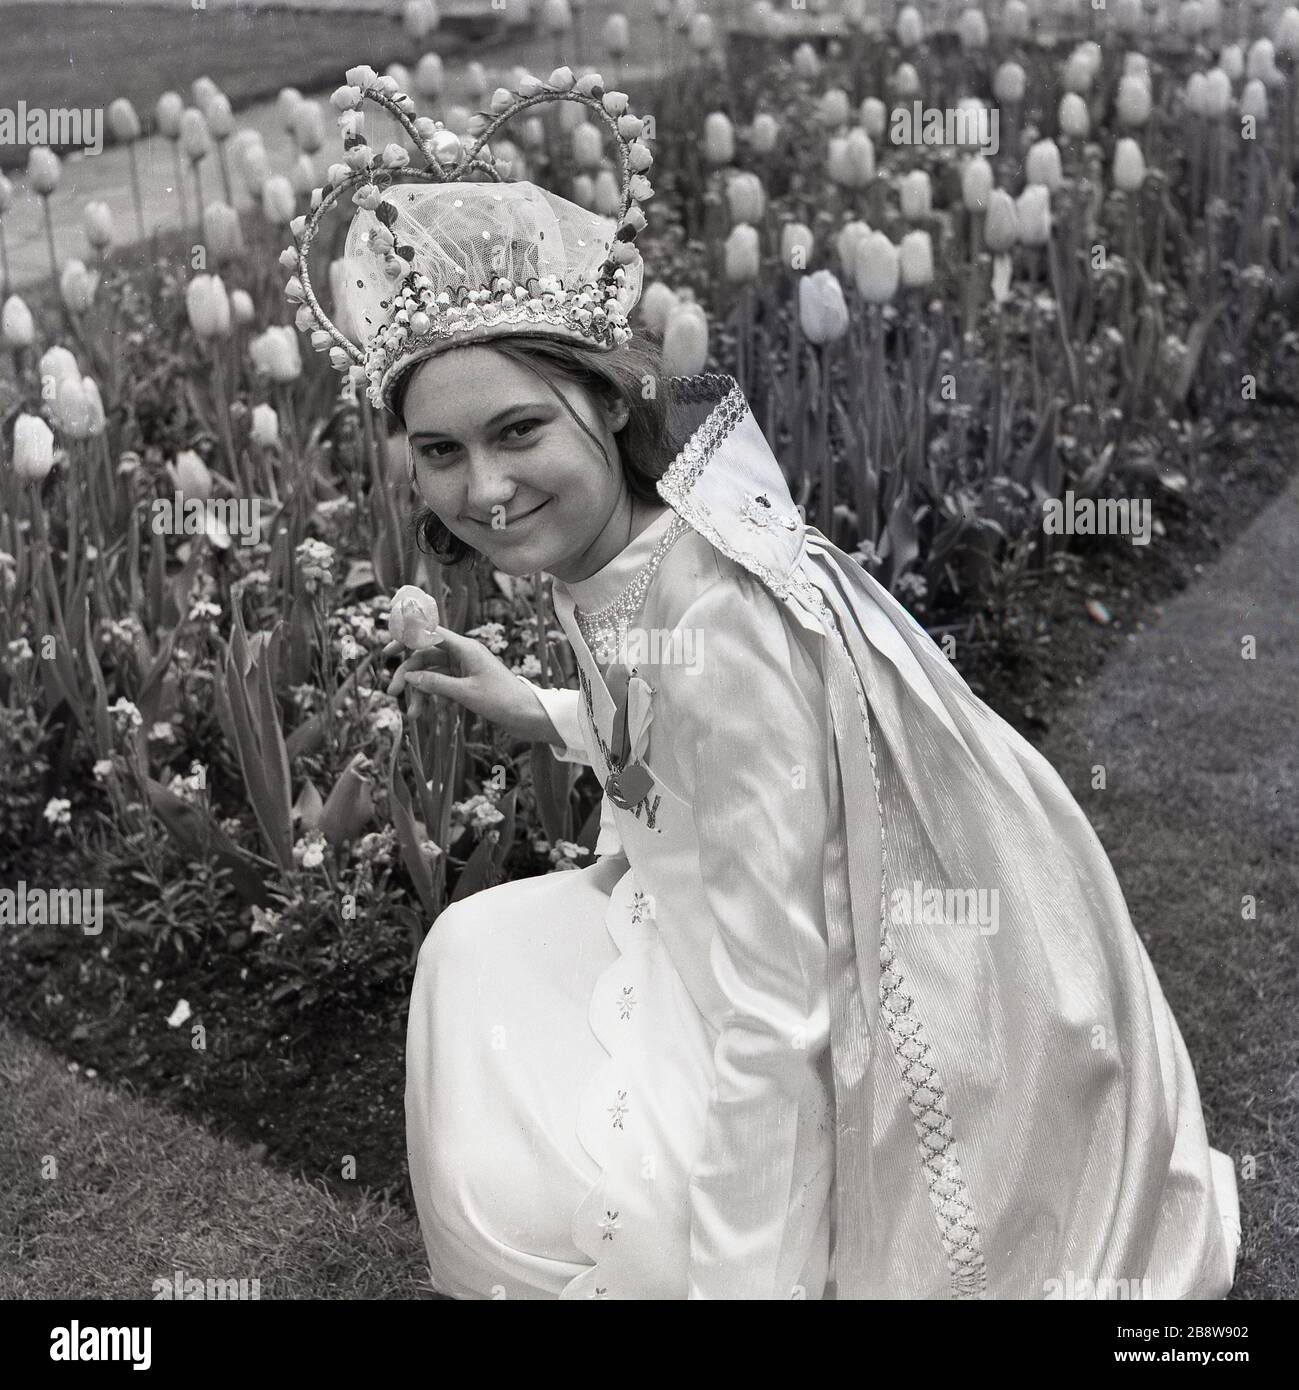 1960s, historical, the newly crowned London May Queen, a young teenage girl wearing her gown and tiara, posing for a picture outside by some flowers, Lewisham, South East London, England, UK. Stock Photo